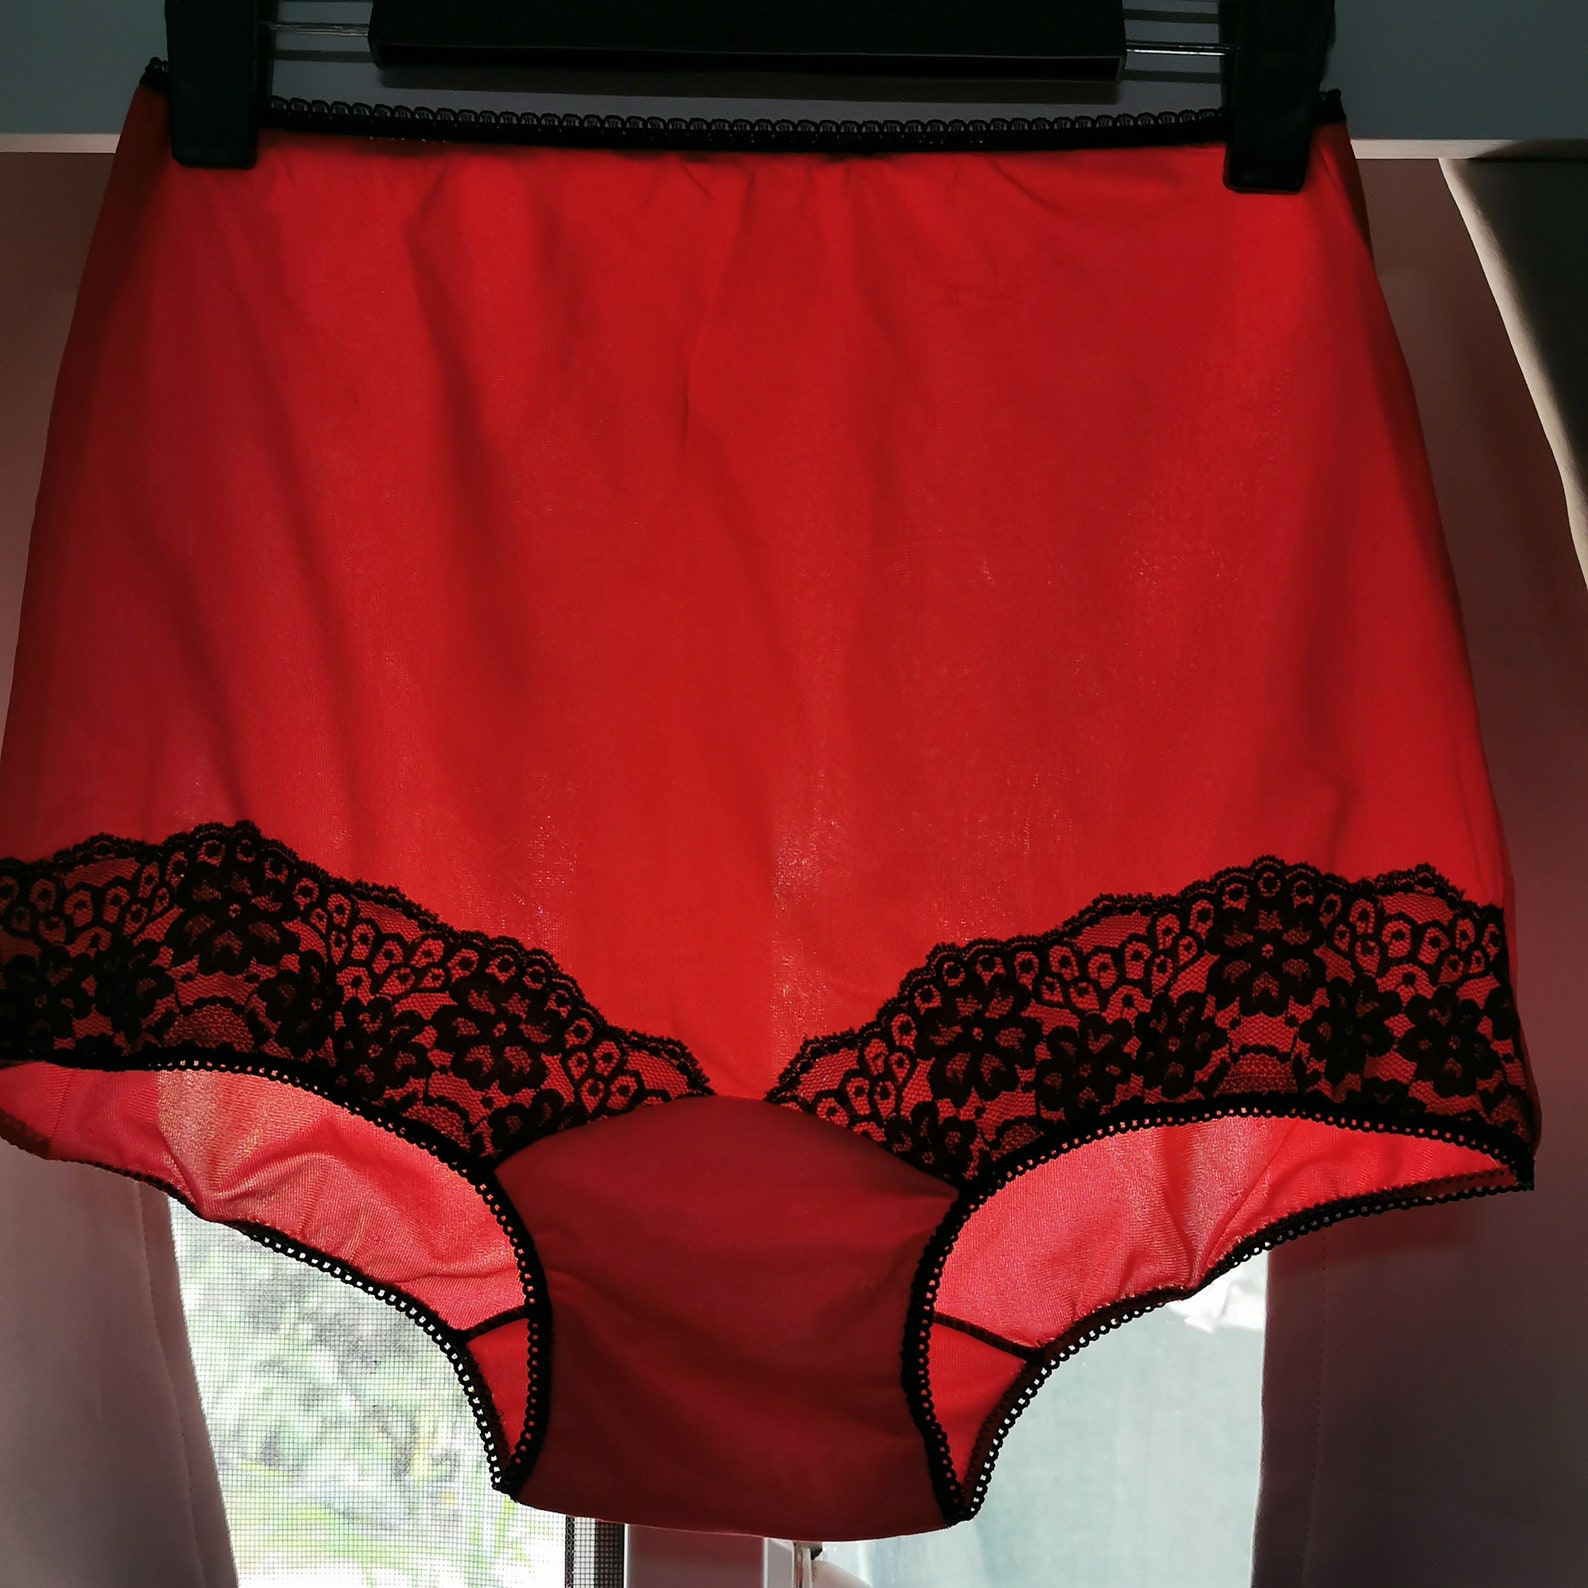 Lovely Vintage Red and Black lace Sheer Granny Panties Size | Etsy